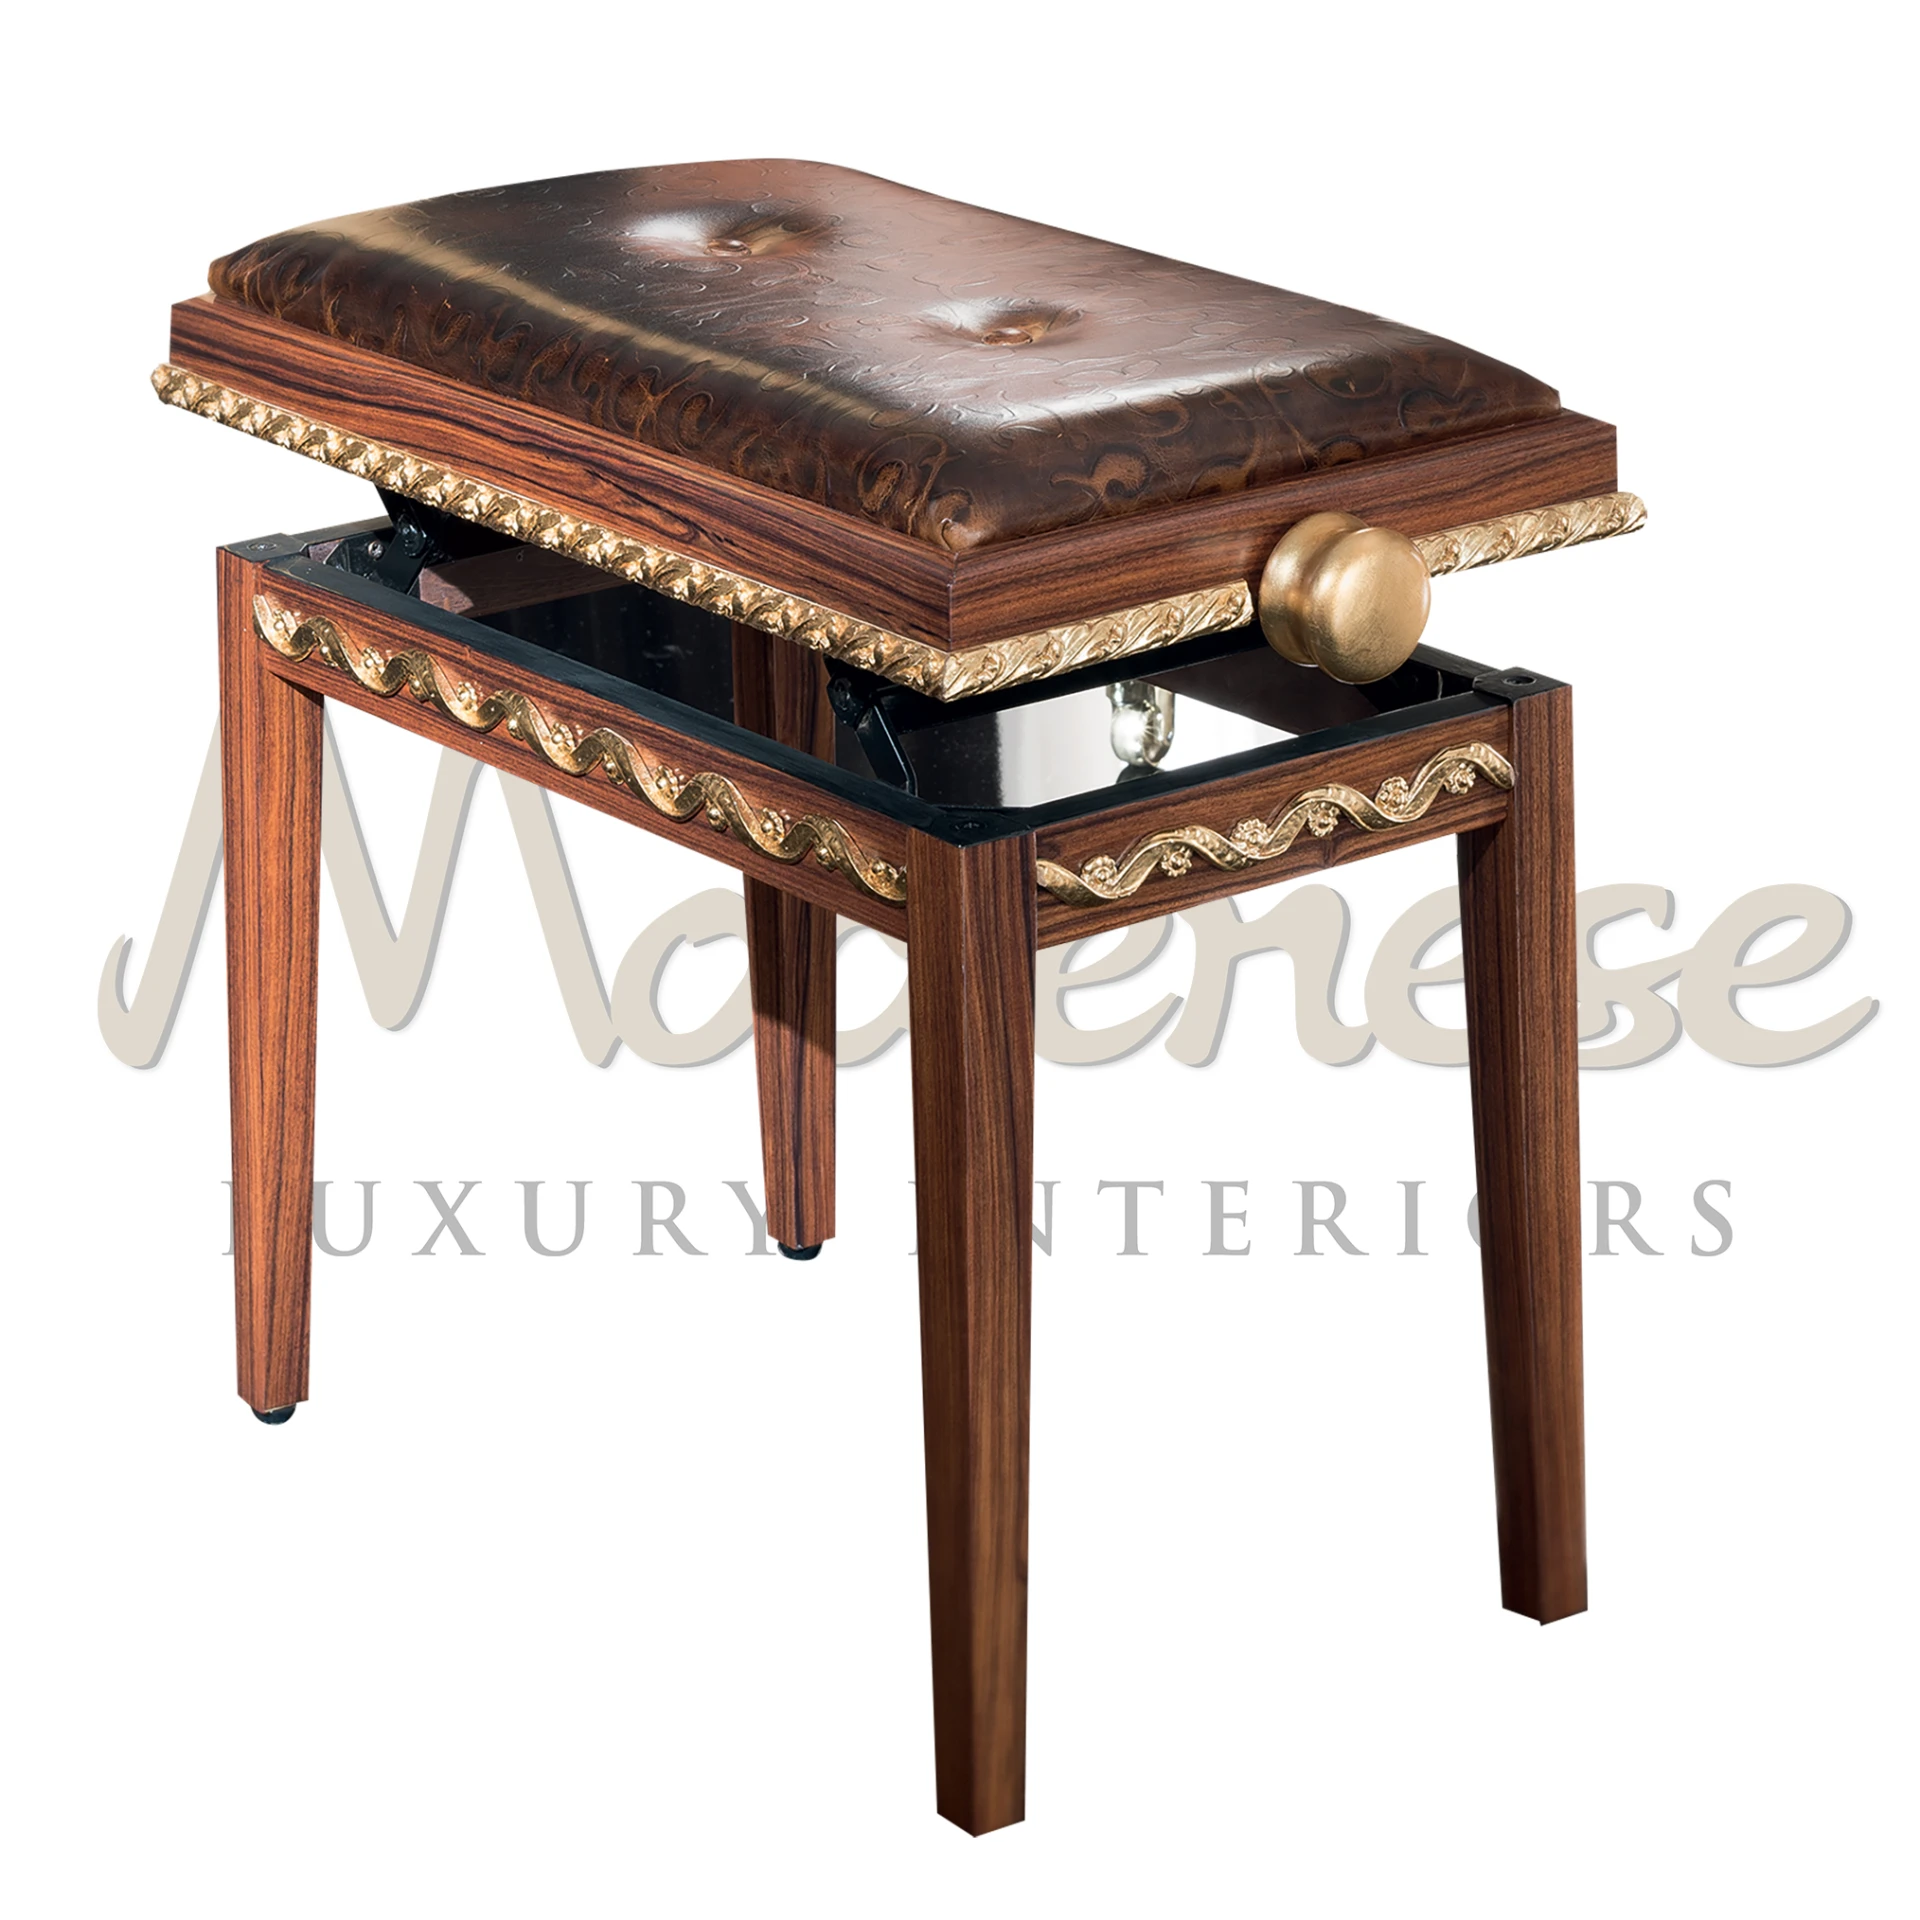 Elegant Leather Piano Stool: Comfortable Seating for Musicians